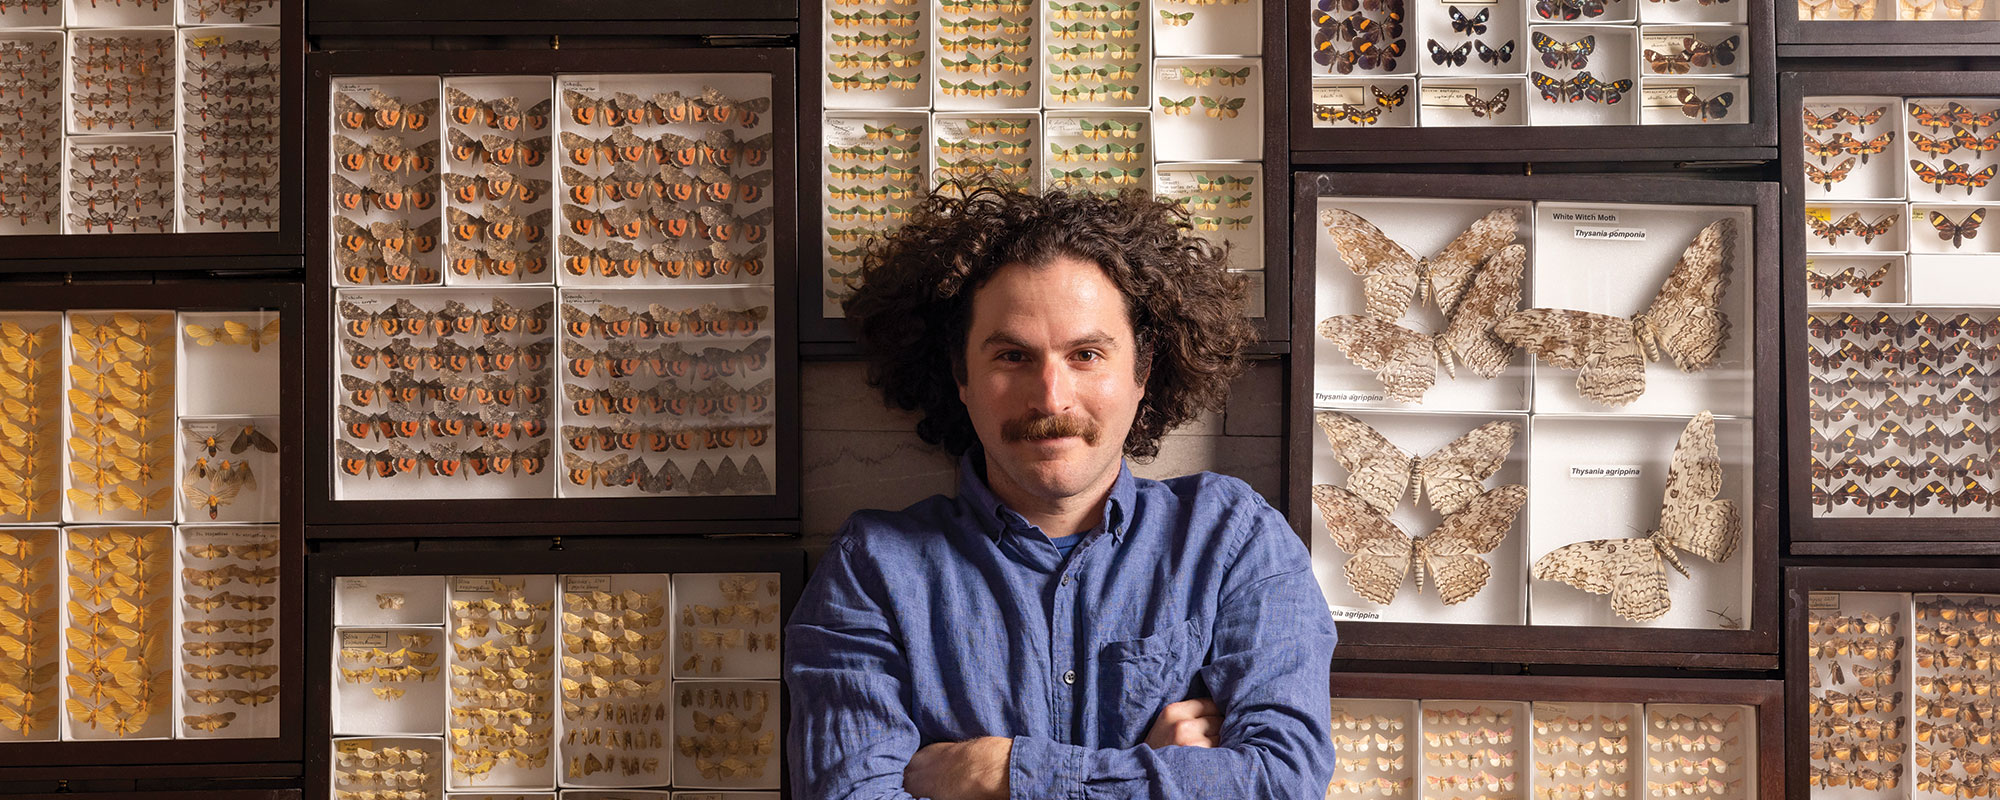 A man with curly hair surrounded by cases of butterfly and moth specimens.